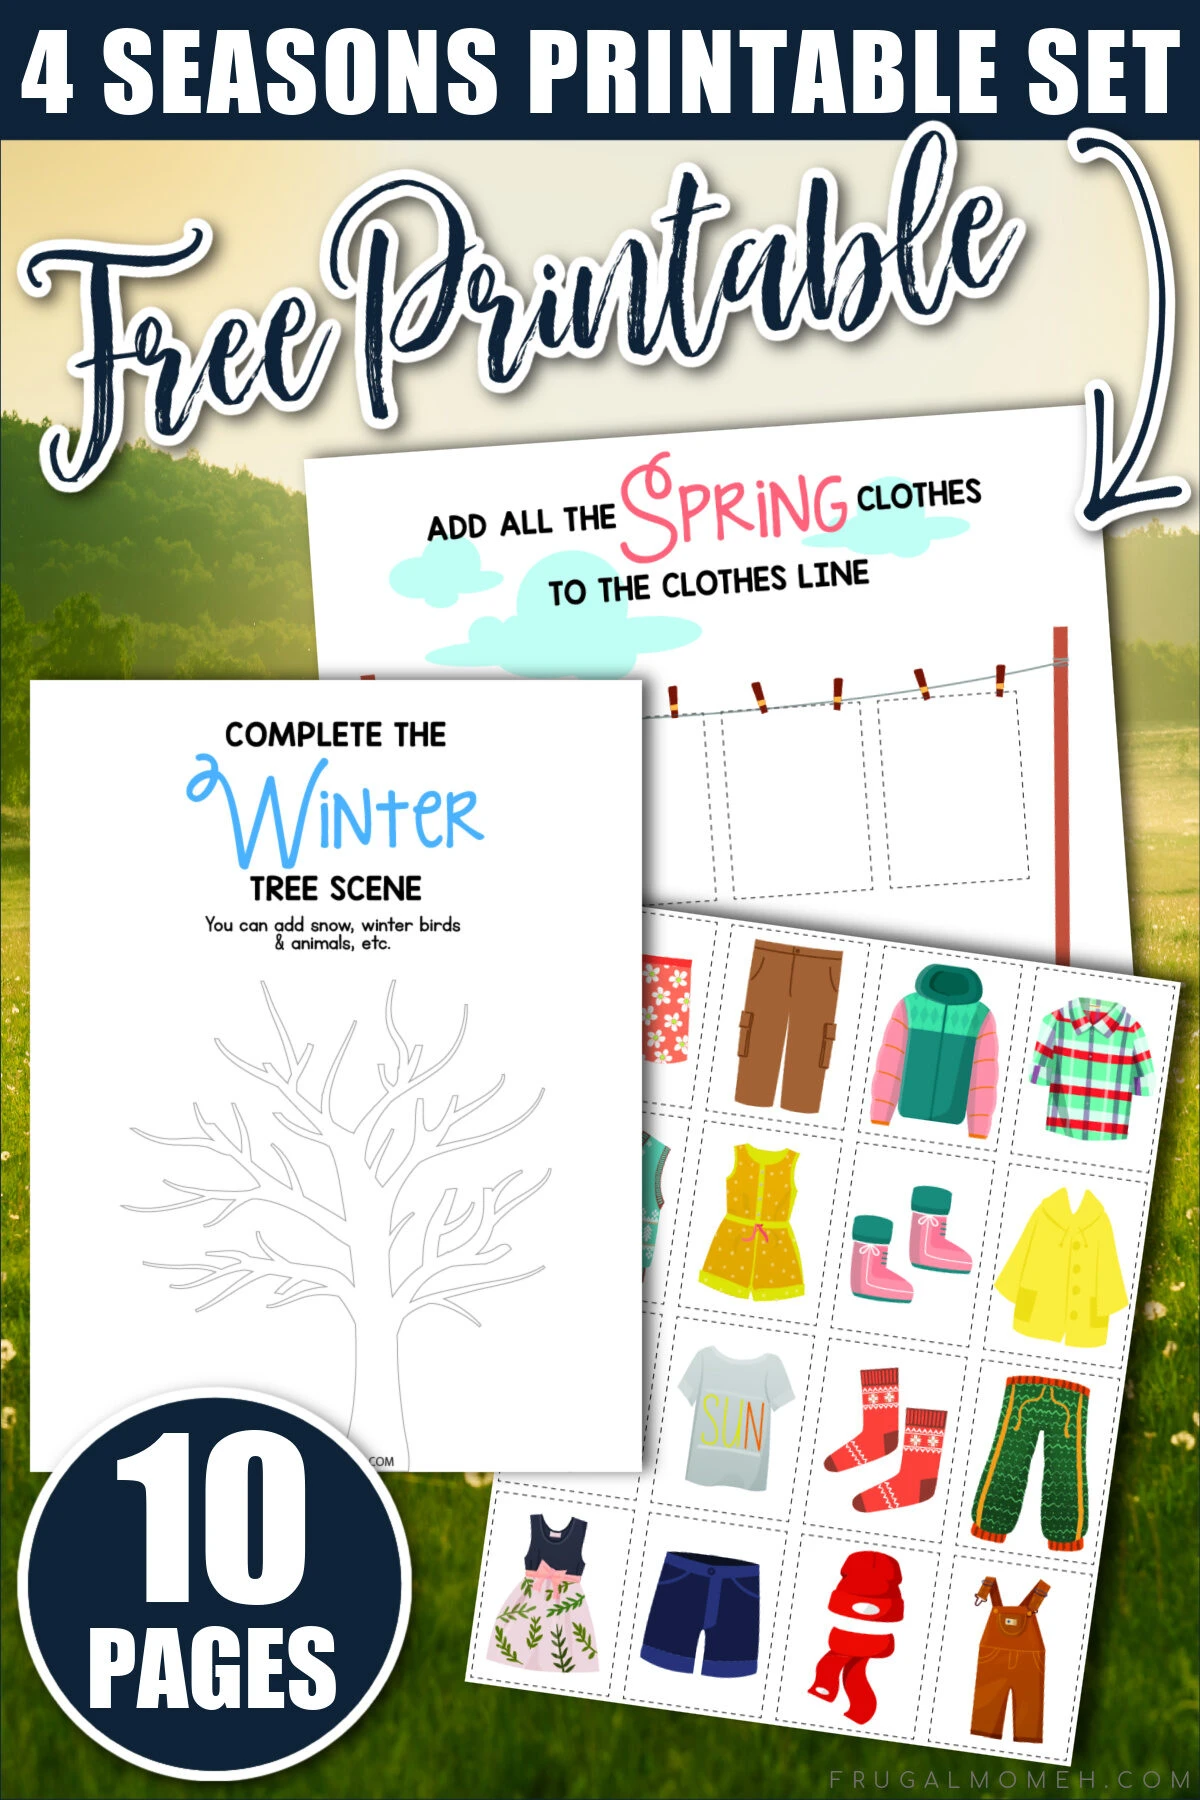 Free printable four seasons worksheets that are perfect for preschool and kindergarten. Sort laundry by season and complete a tree diagram!